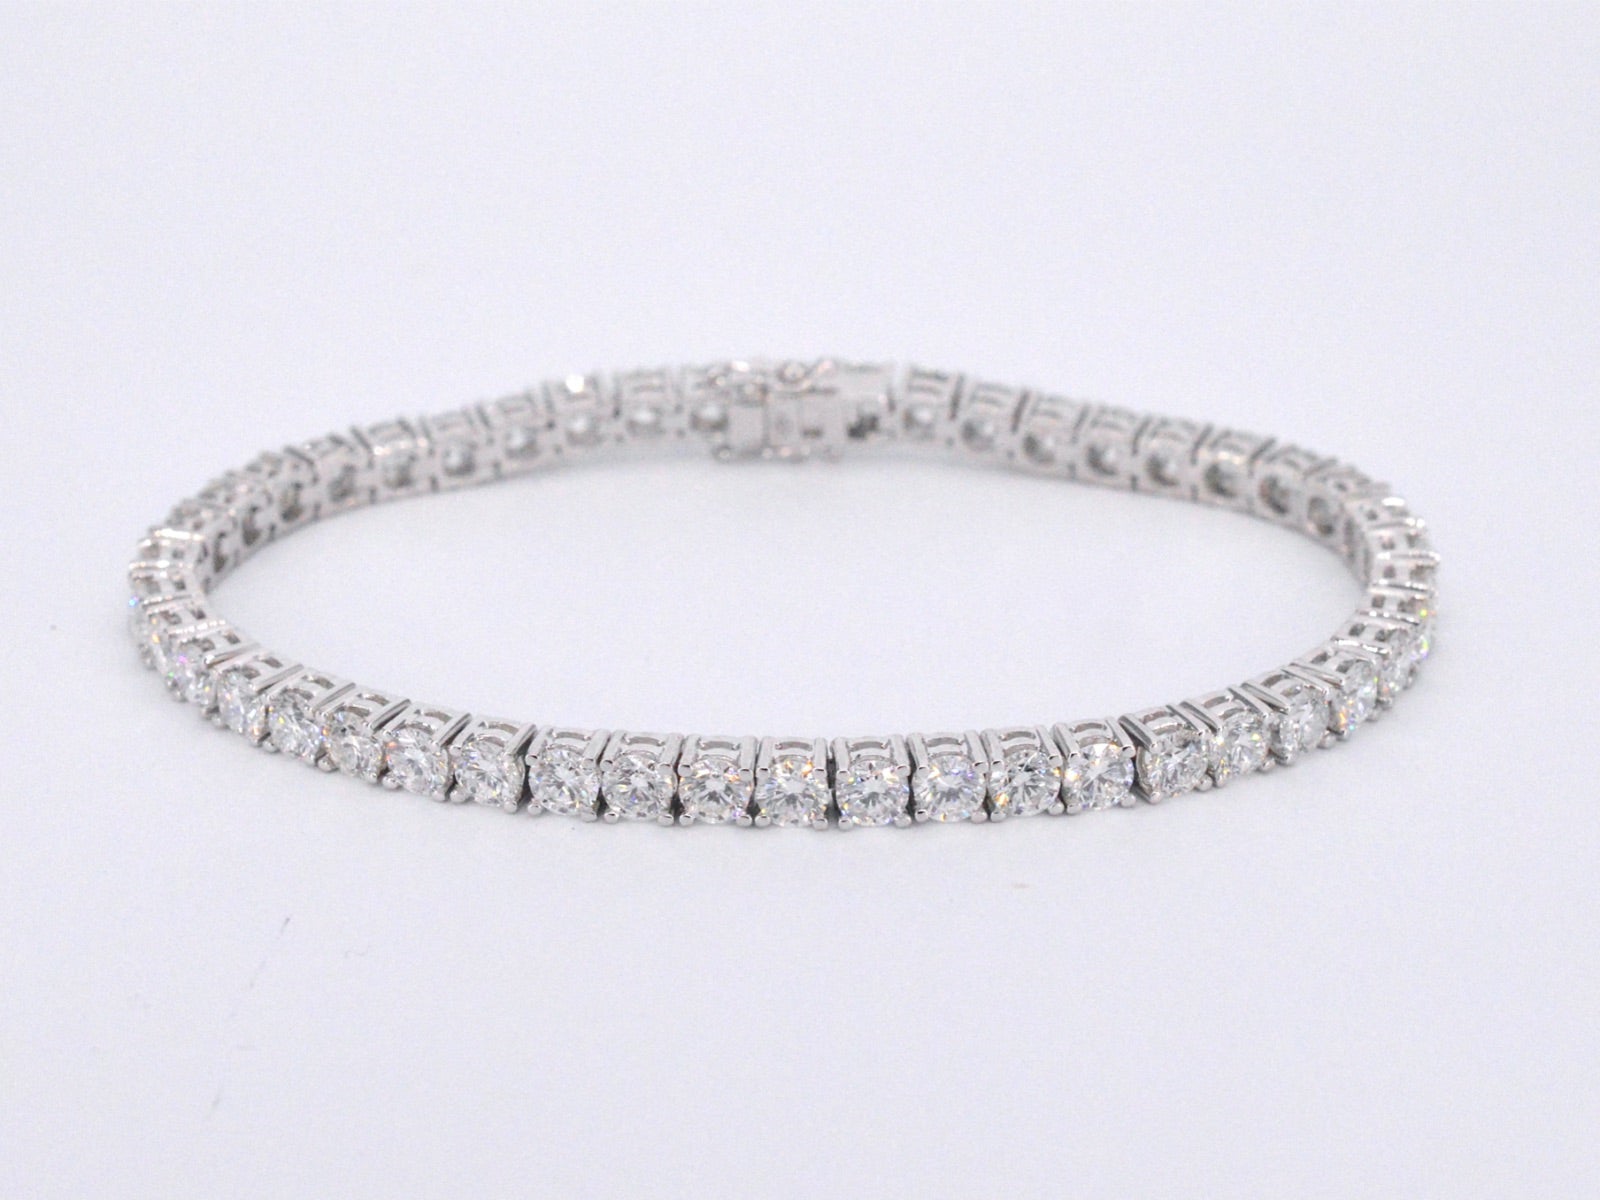 Presenting our exquisite diamond bracelet, a true testament to luxury and timeless elegance. This stunning piece features 46 brilliant-cut diamonds, totaling an impressive 9.00 carats, with captivating F-G color and VS clarity. Meticulously crafted